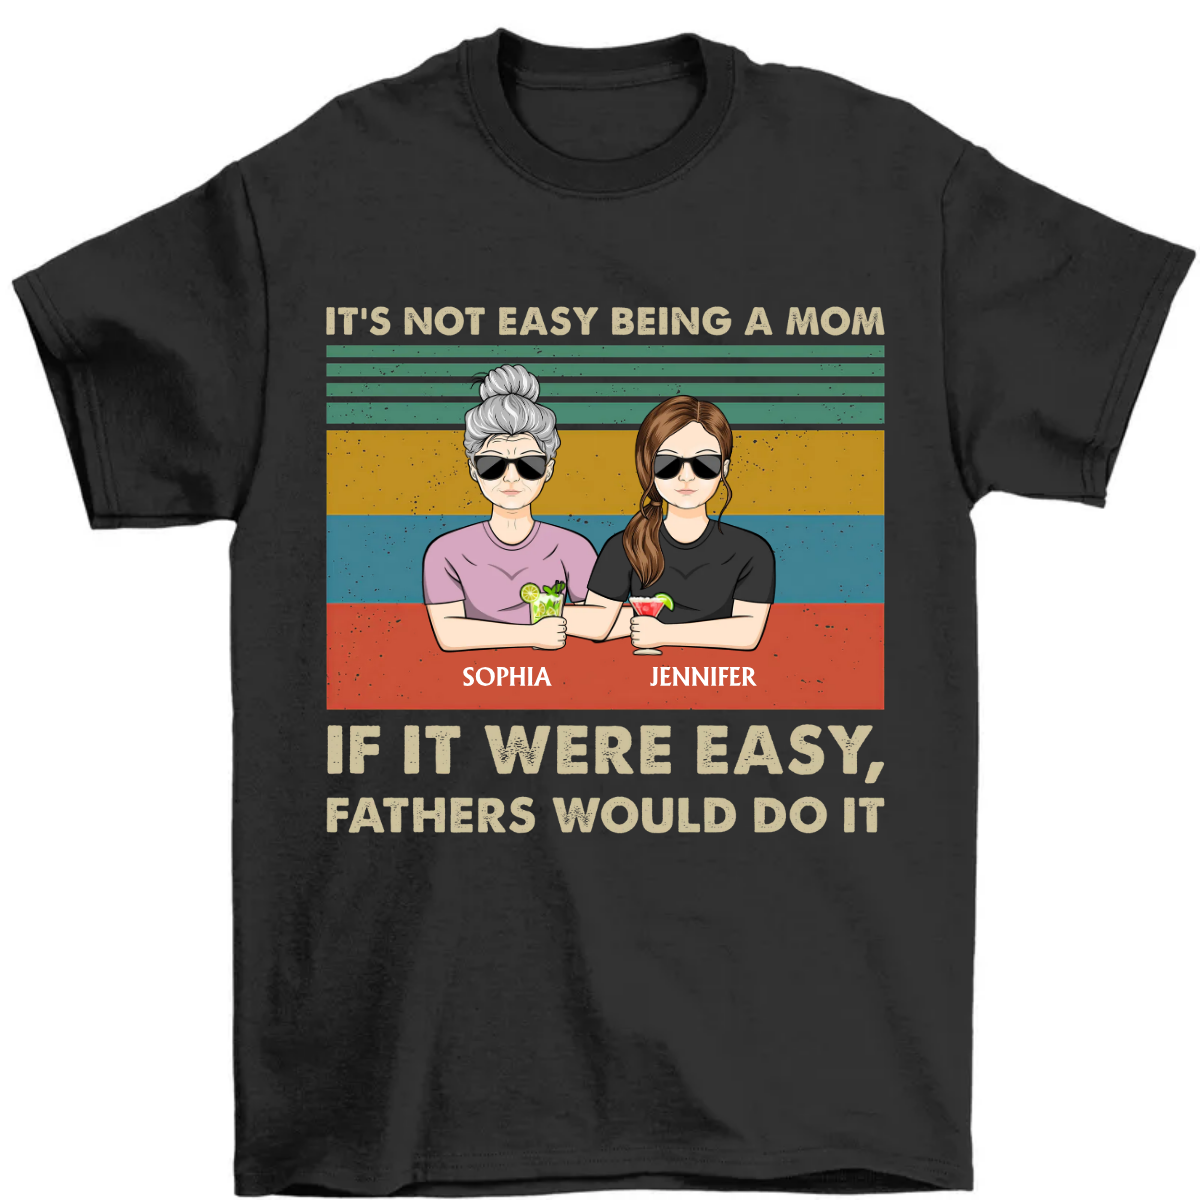 It's Not Easy Being A Mom - Gift For Mom, Mother, Grandma - Personalized T Shirt